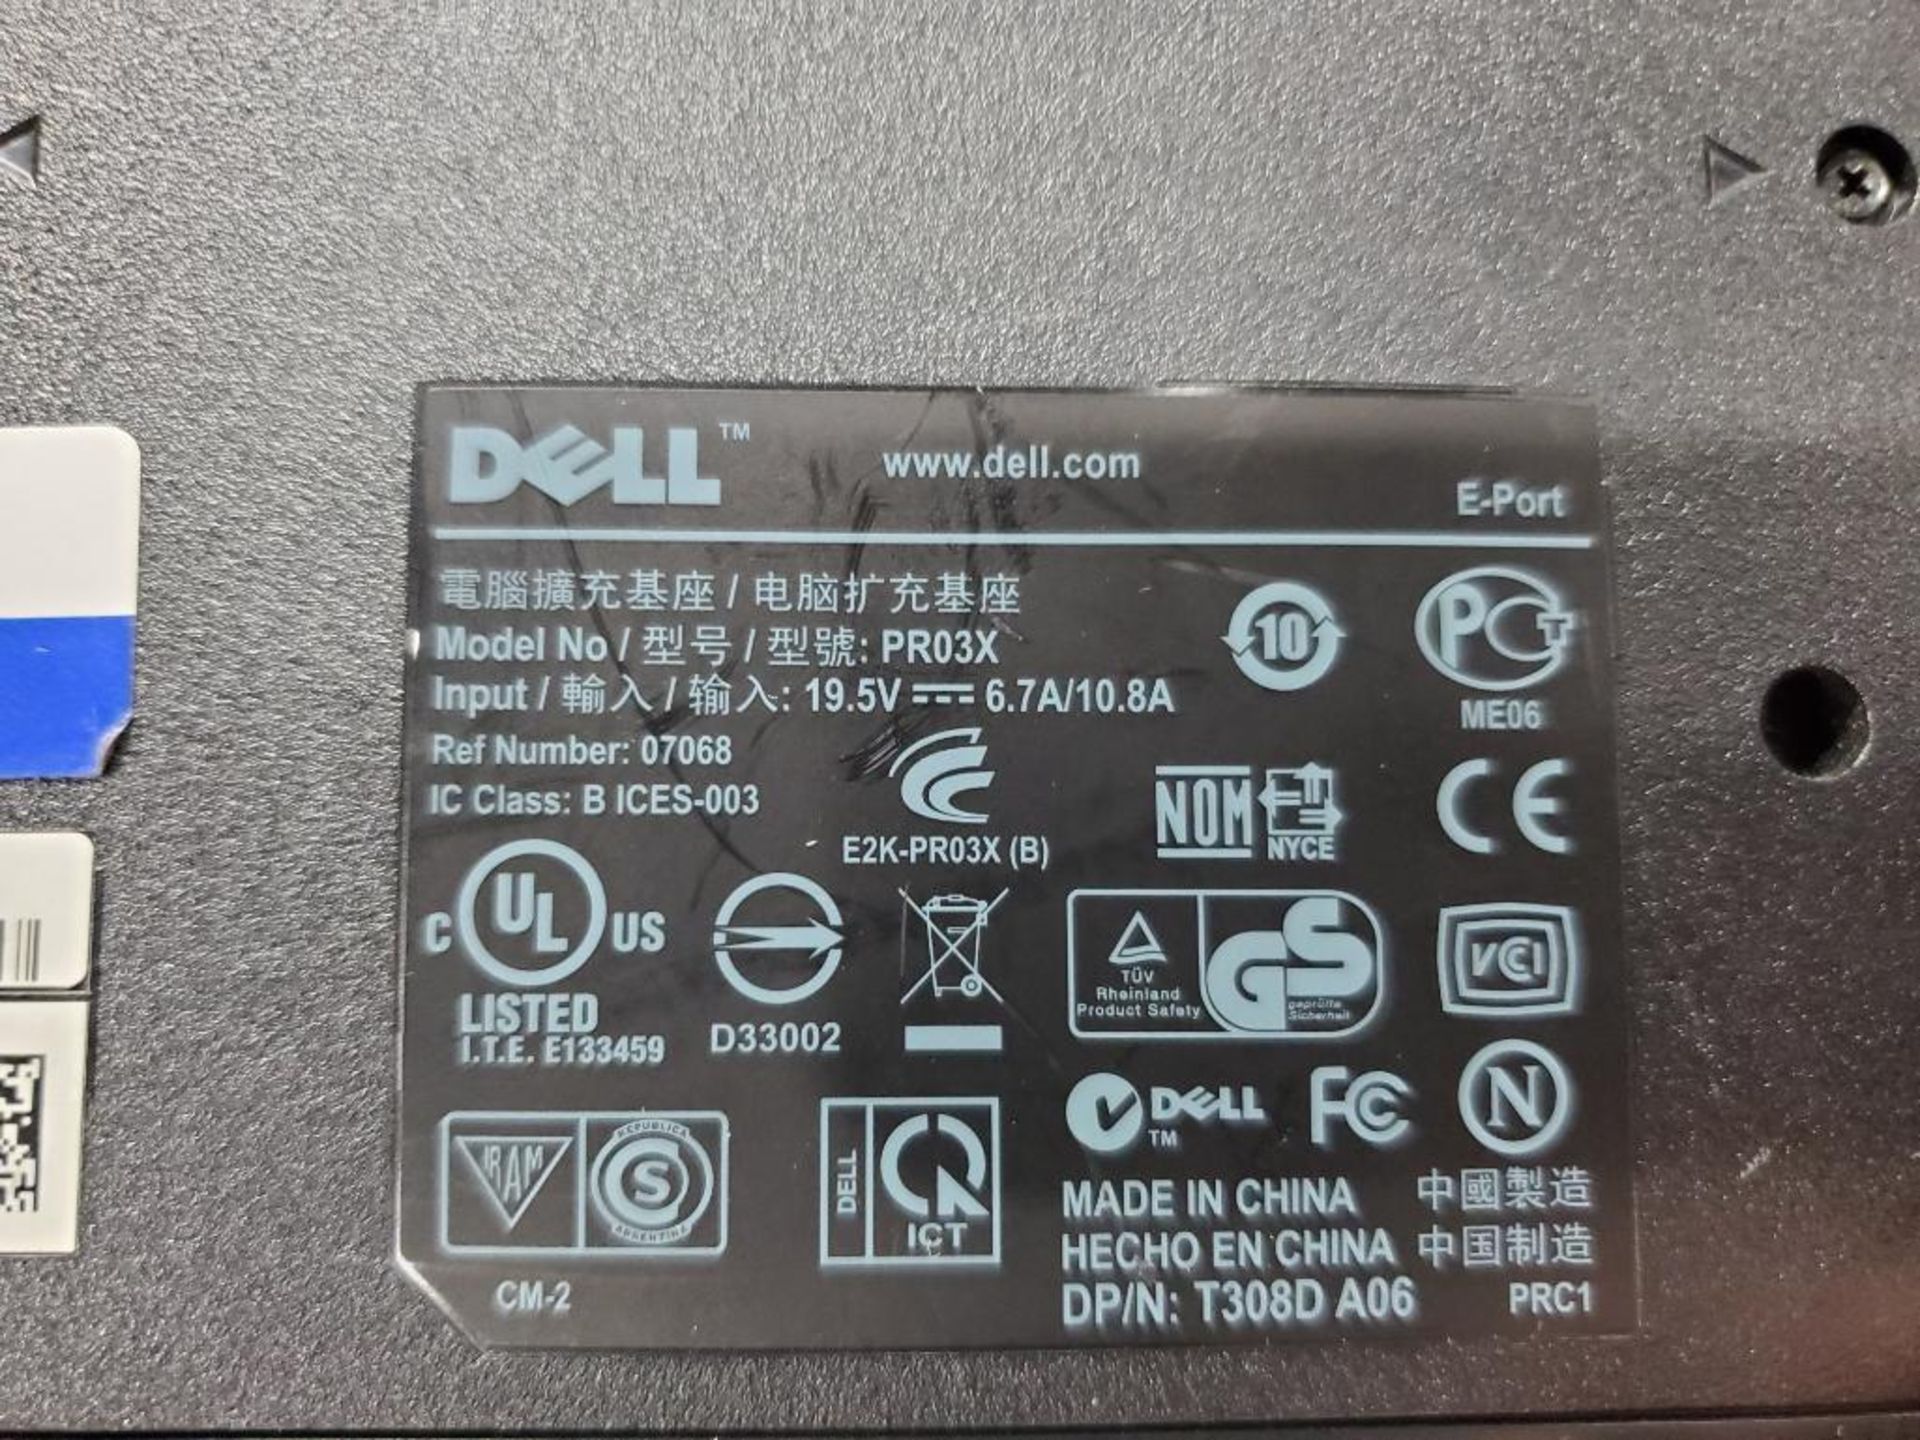 Assorted Dell docking stations and power supplies. - Image 4 of 7